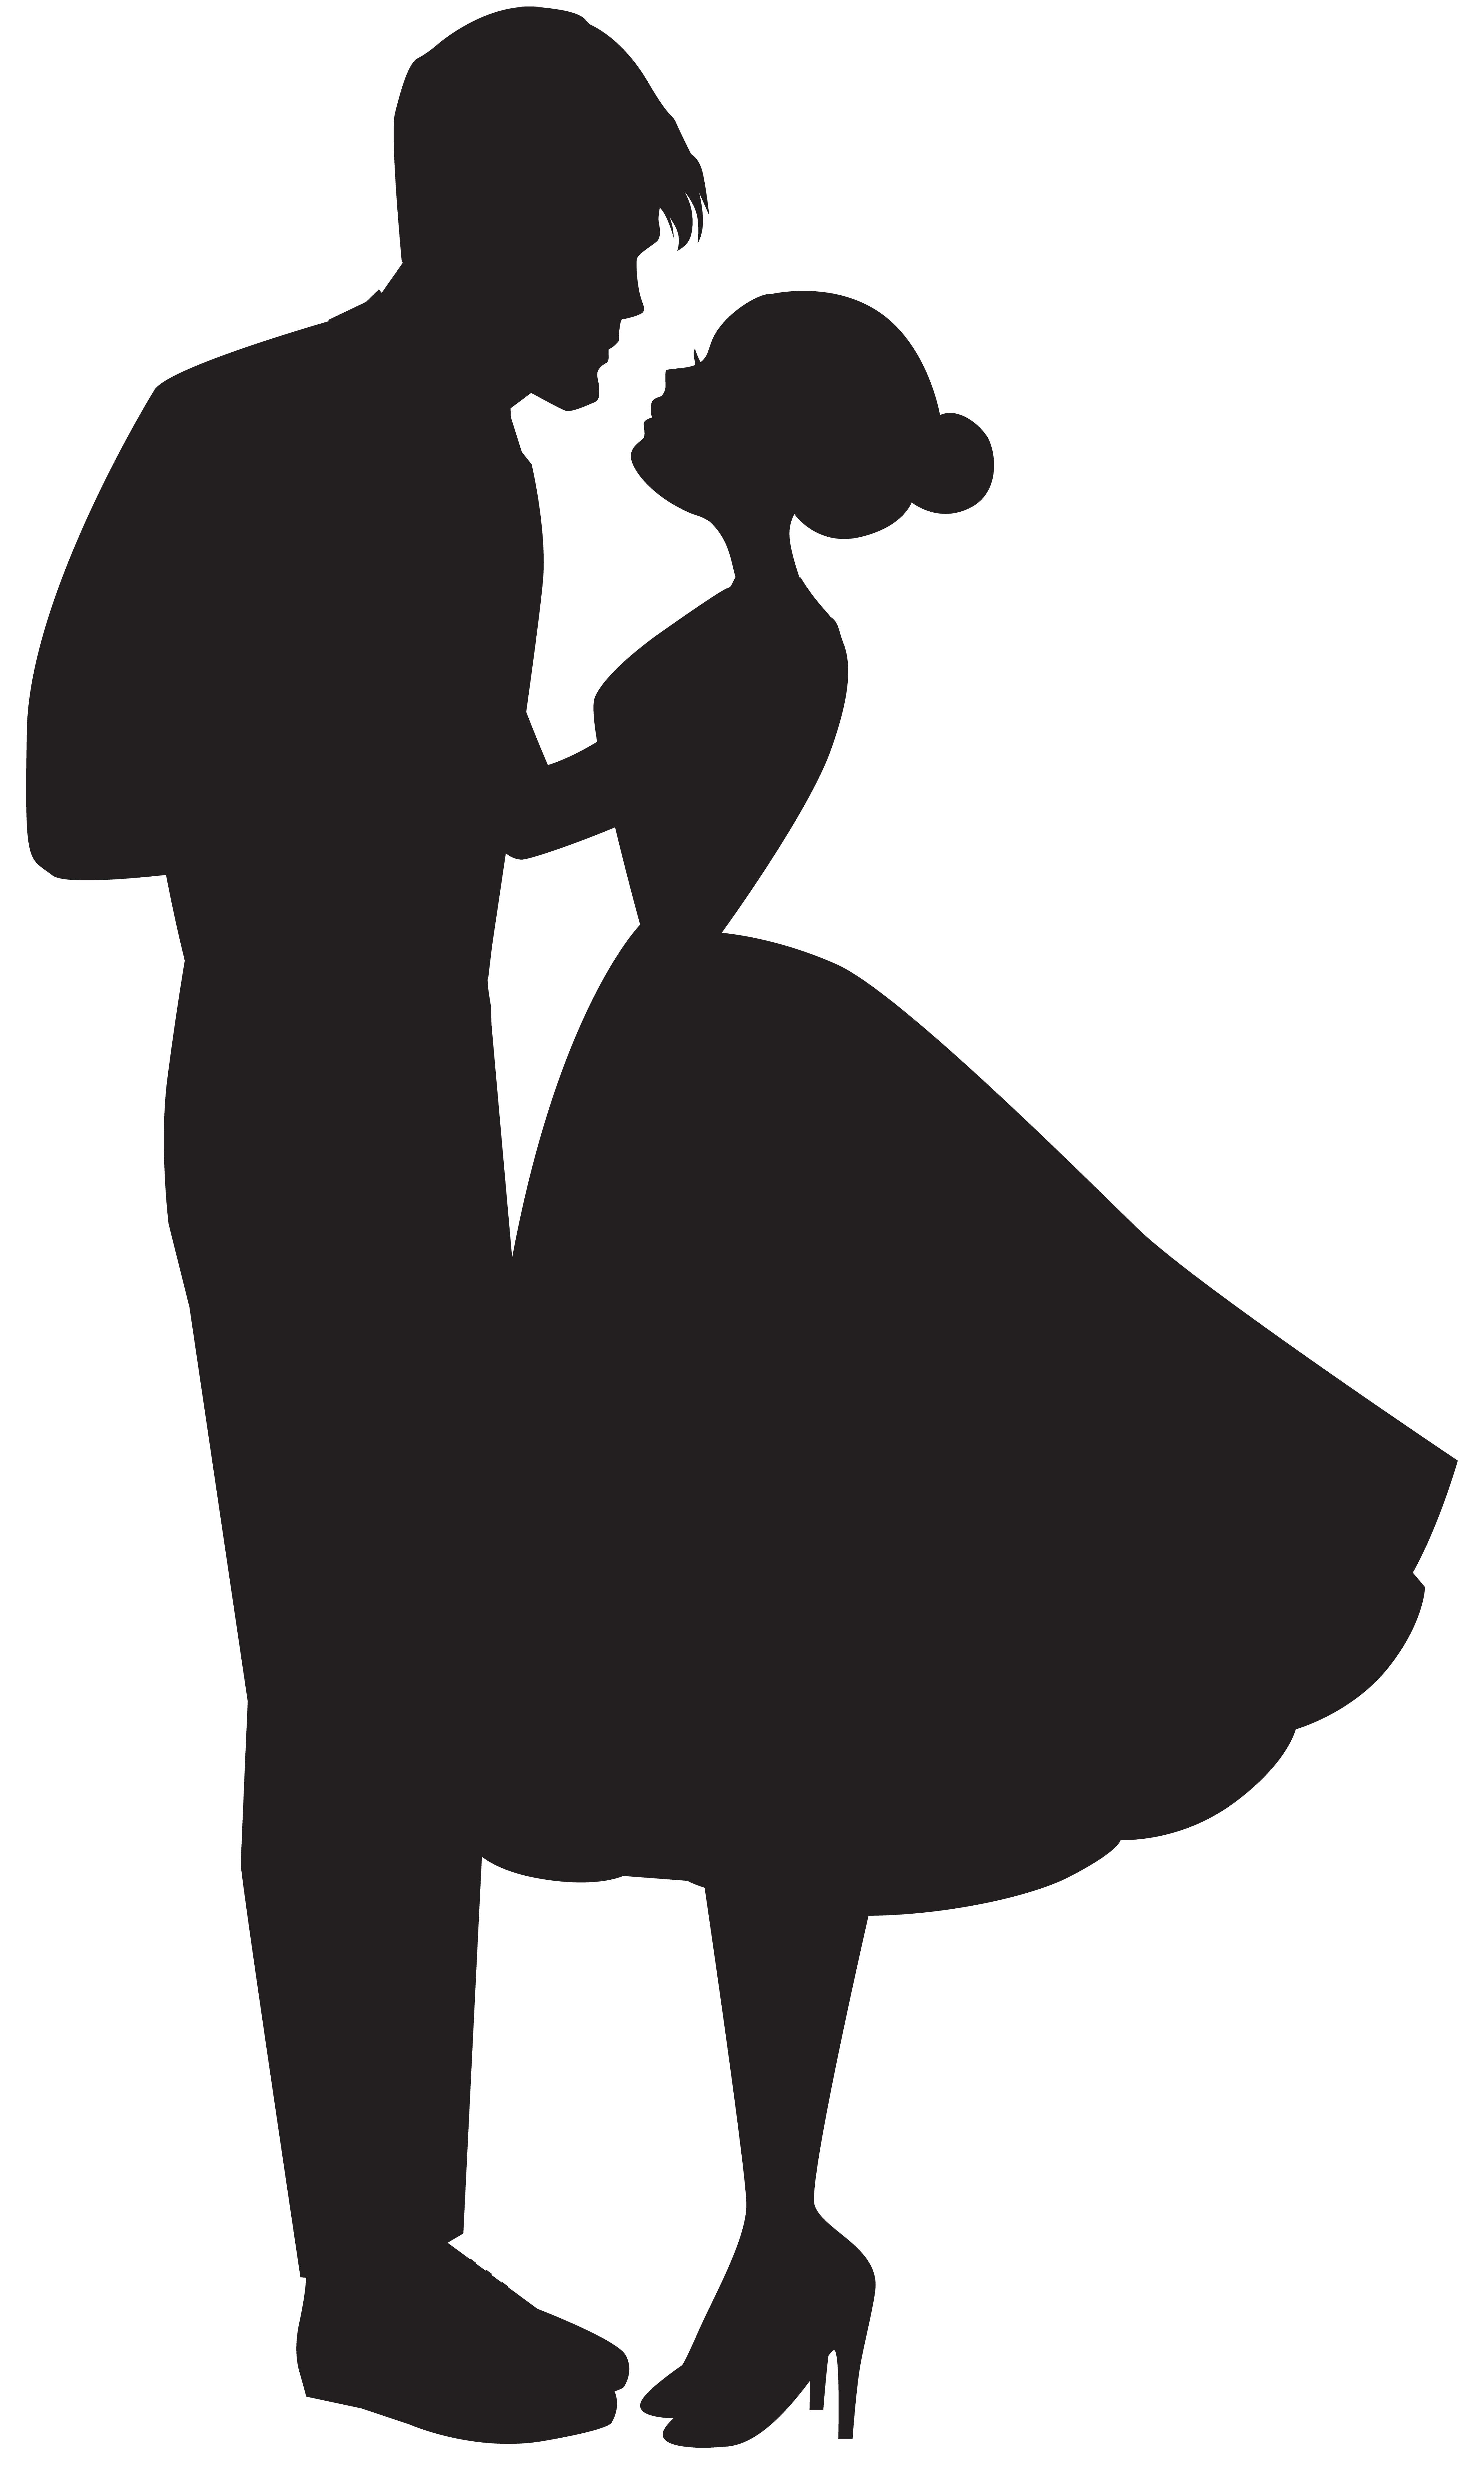 Couple Silhouette Clipart, Couples Silhouettes, Lovers Silhouettes Clip  Art, Cupid Silhouettes, Wedding Silhouettes Clipart -  Denmark